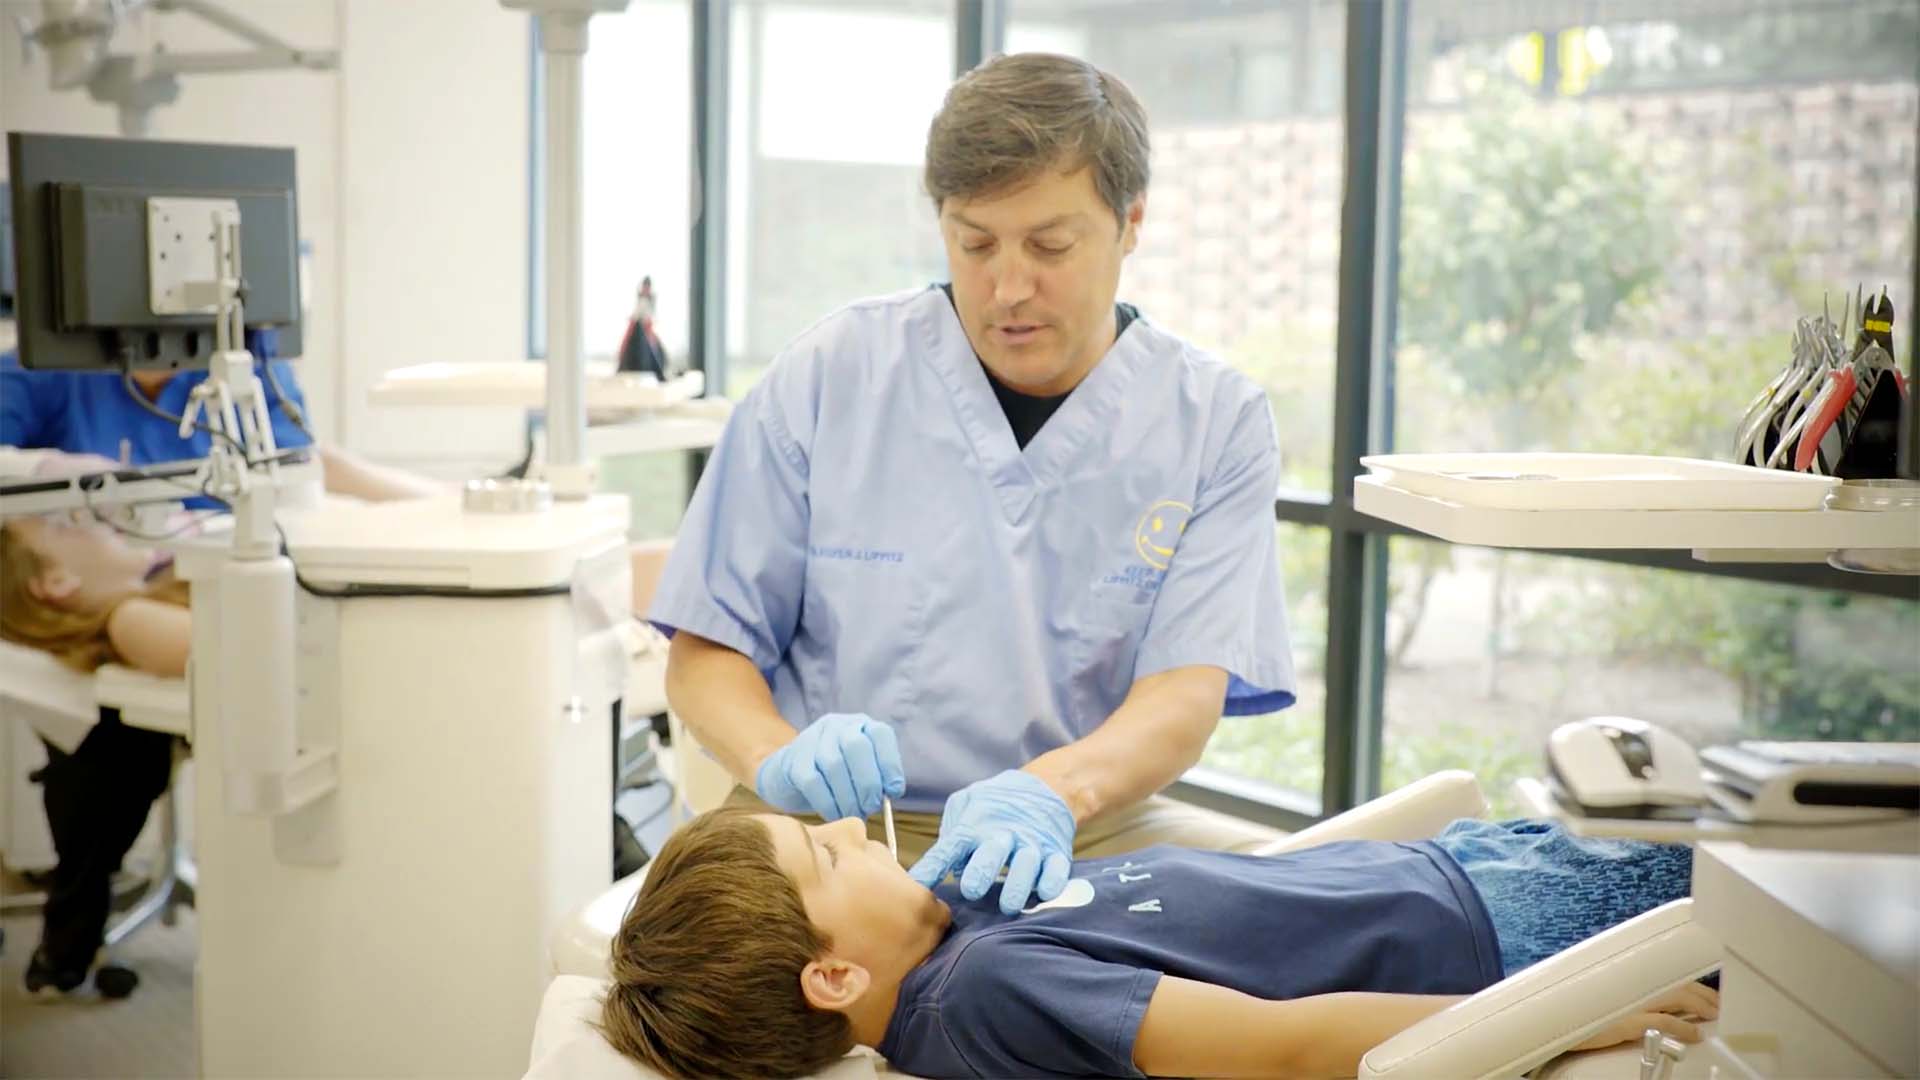 Dr Lippitz performs an orthodontic examination of a patient from Glencoe